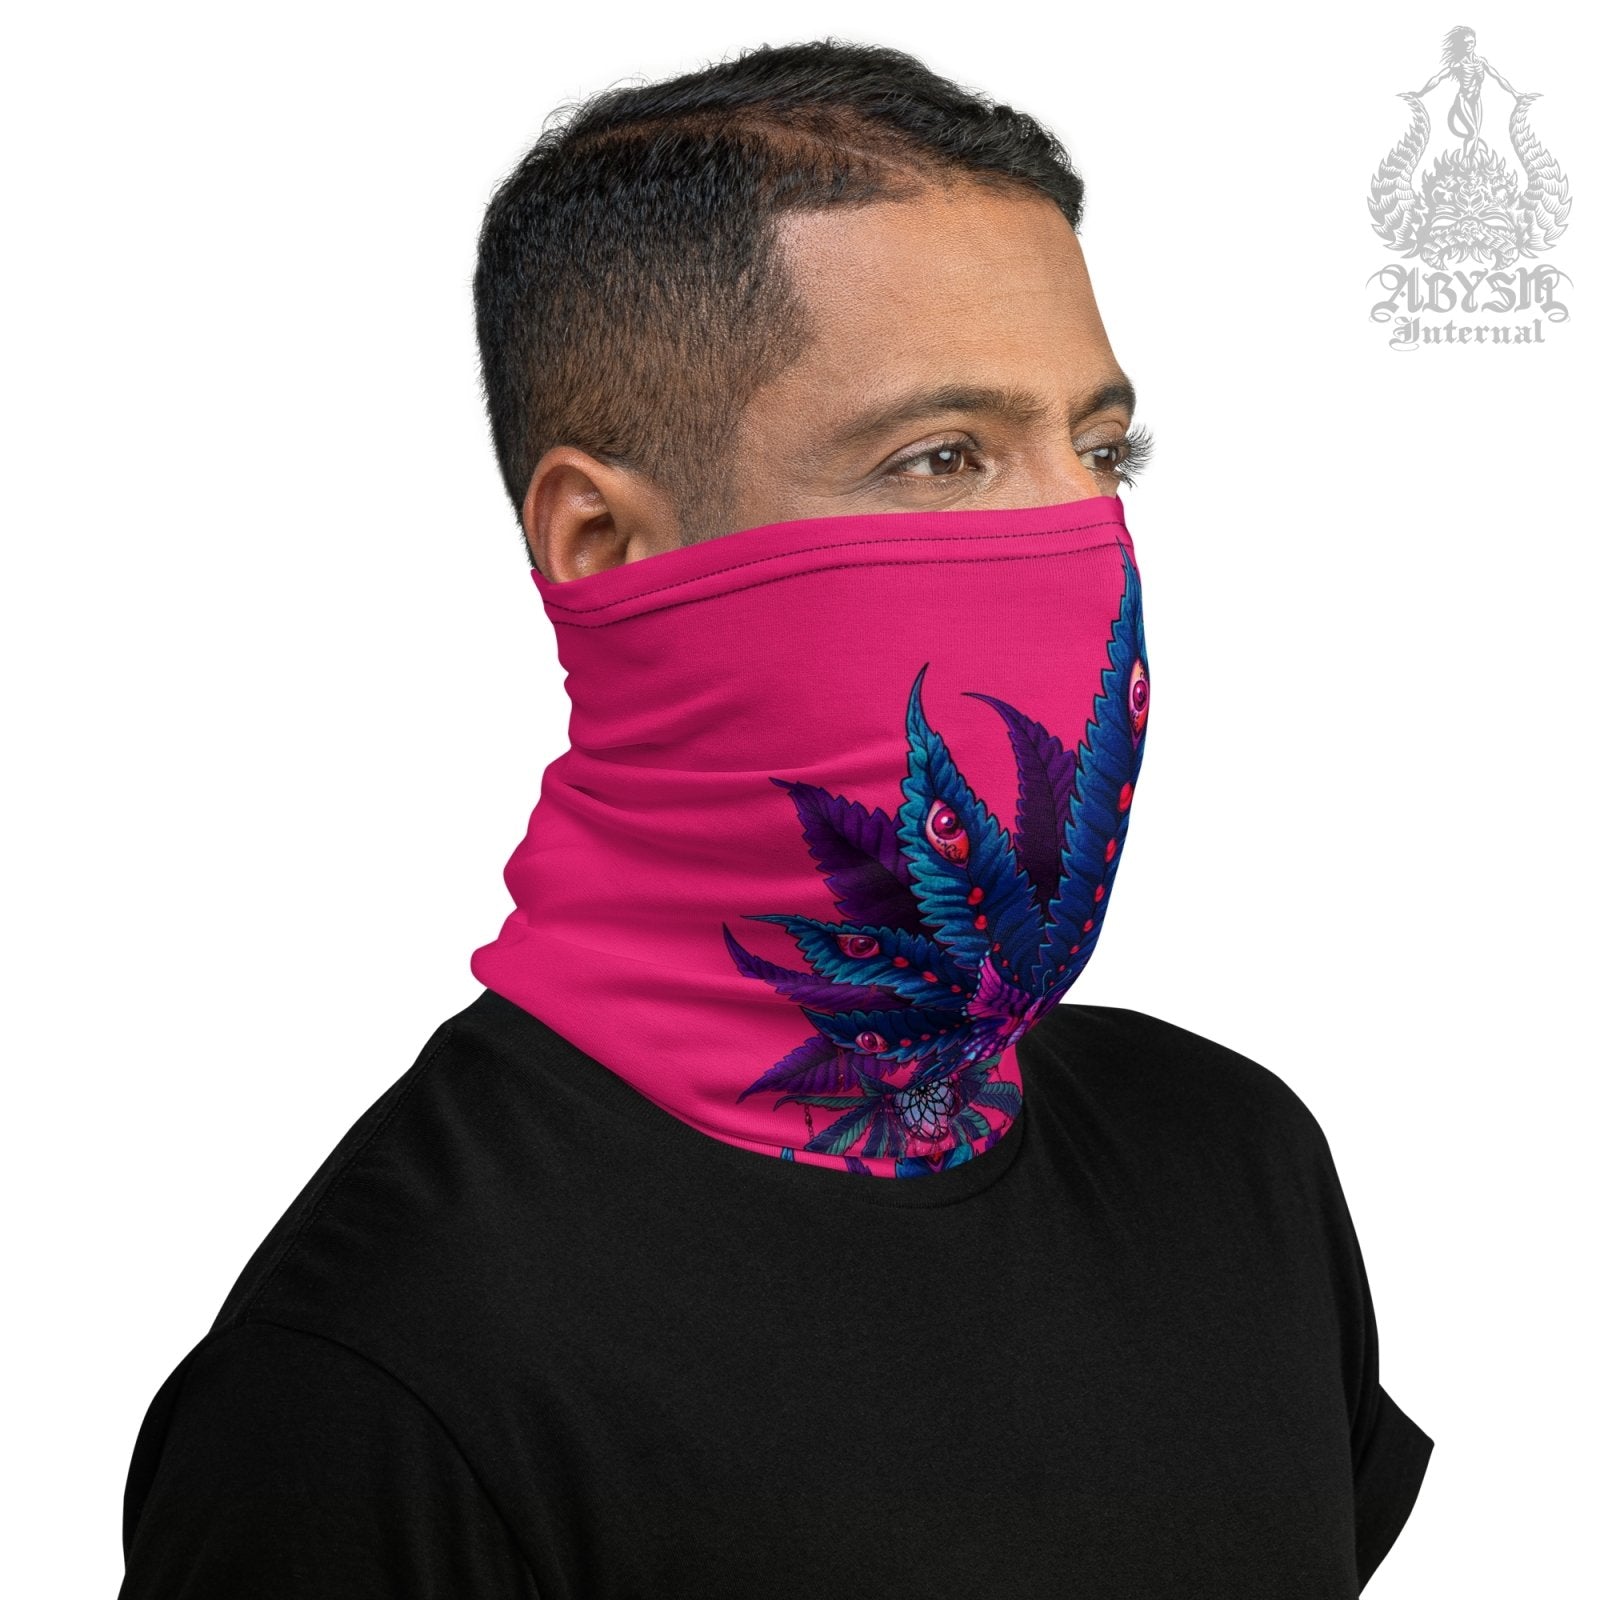 Cannabis Neck Gaiter, Weed Face Mask, Marijuana Head Covering, Neon Retrowave, Festival Outfit, 420 Gift - I Pink - Abysm Internal